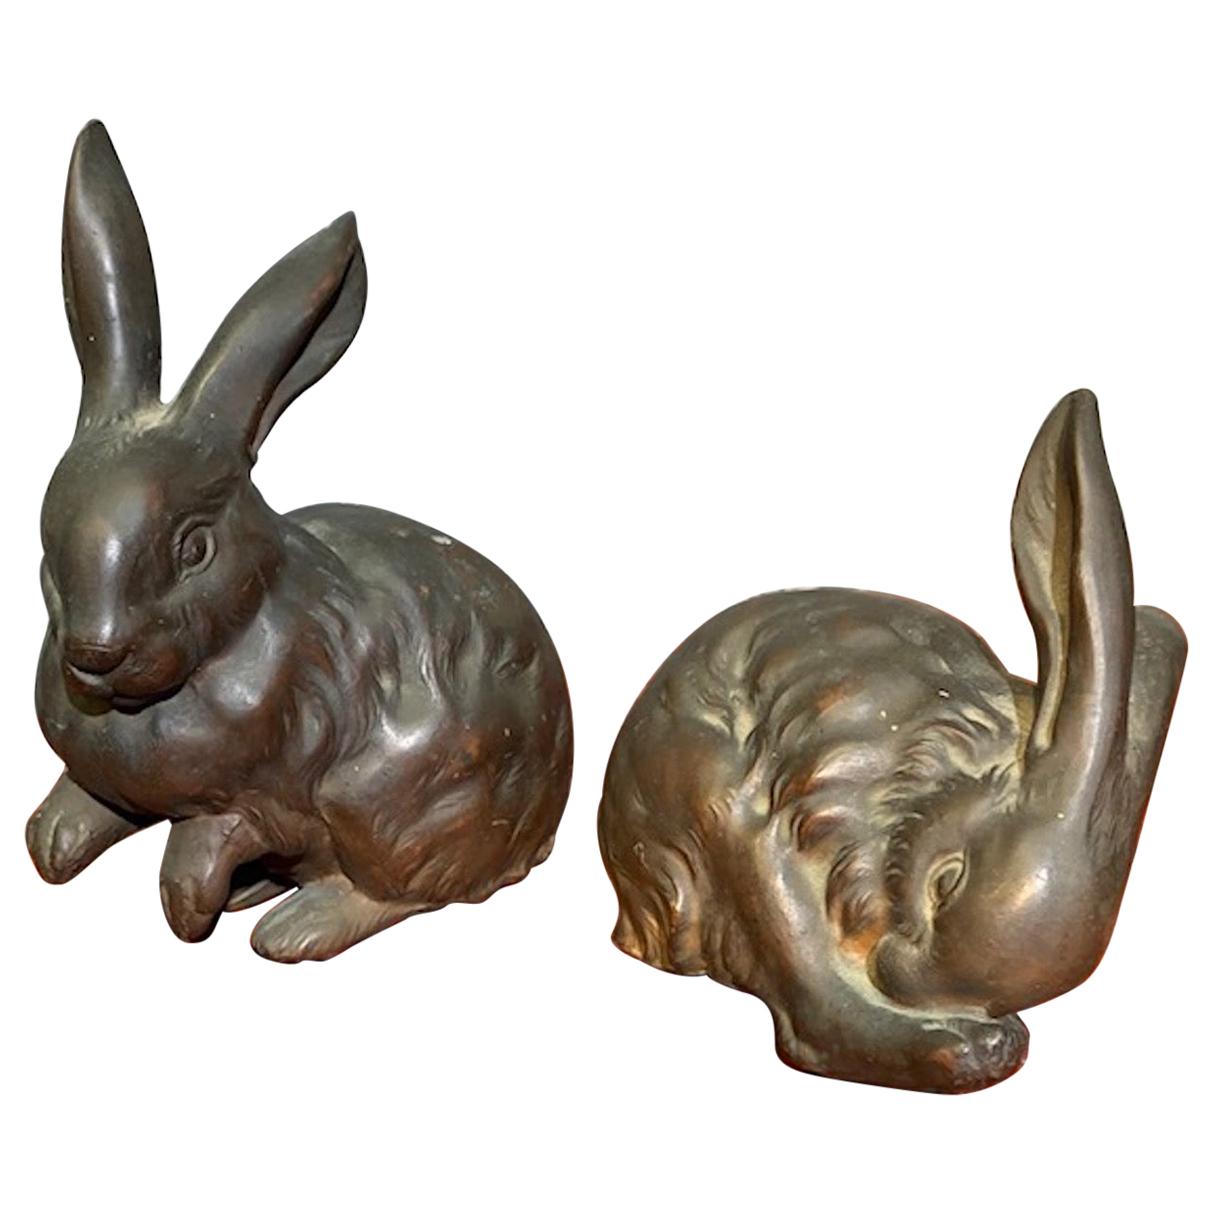 Taisho Period '1912-1926' Japanese Bronze Rabbits For Sale